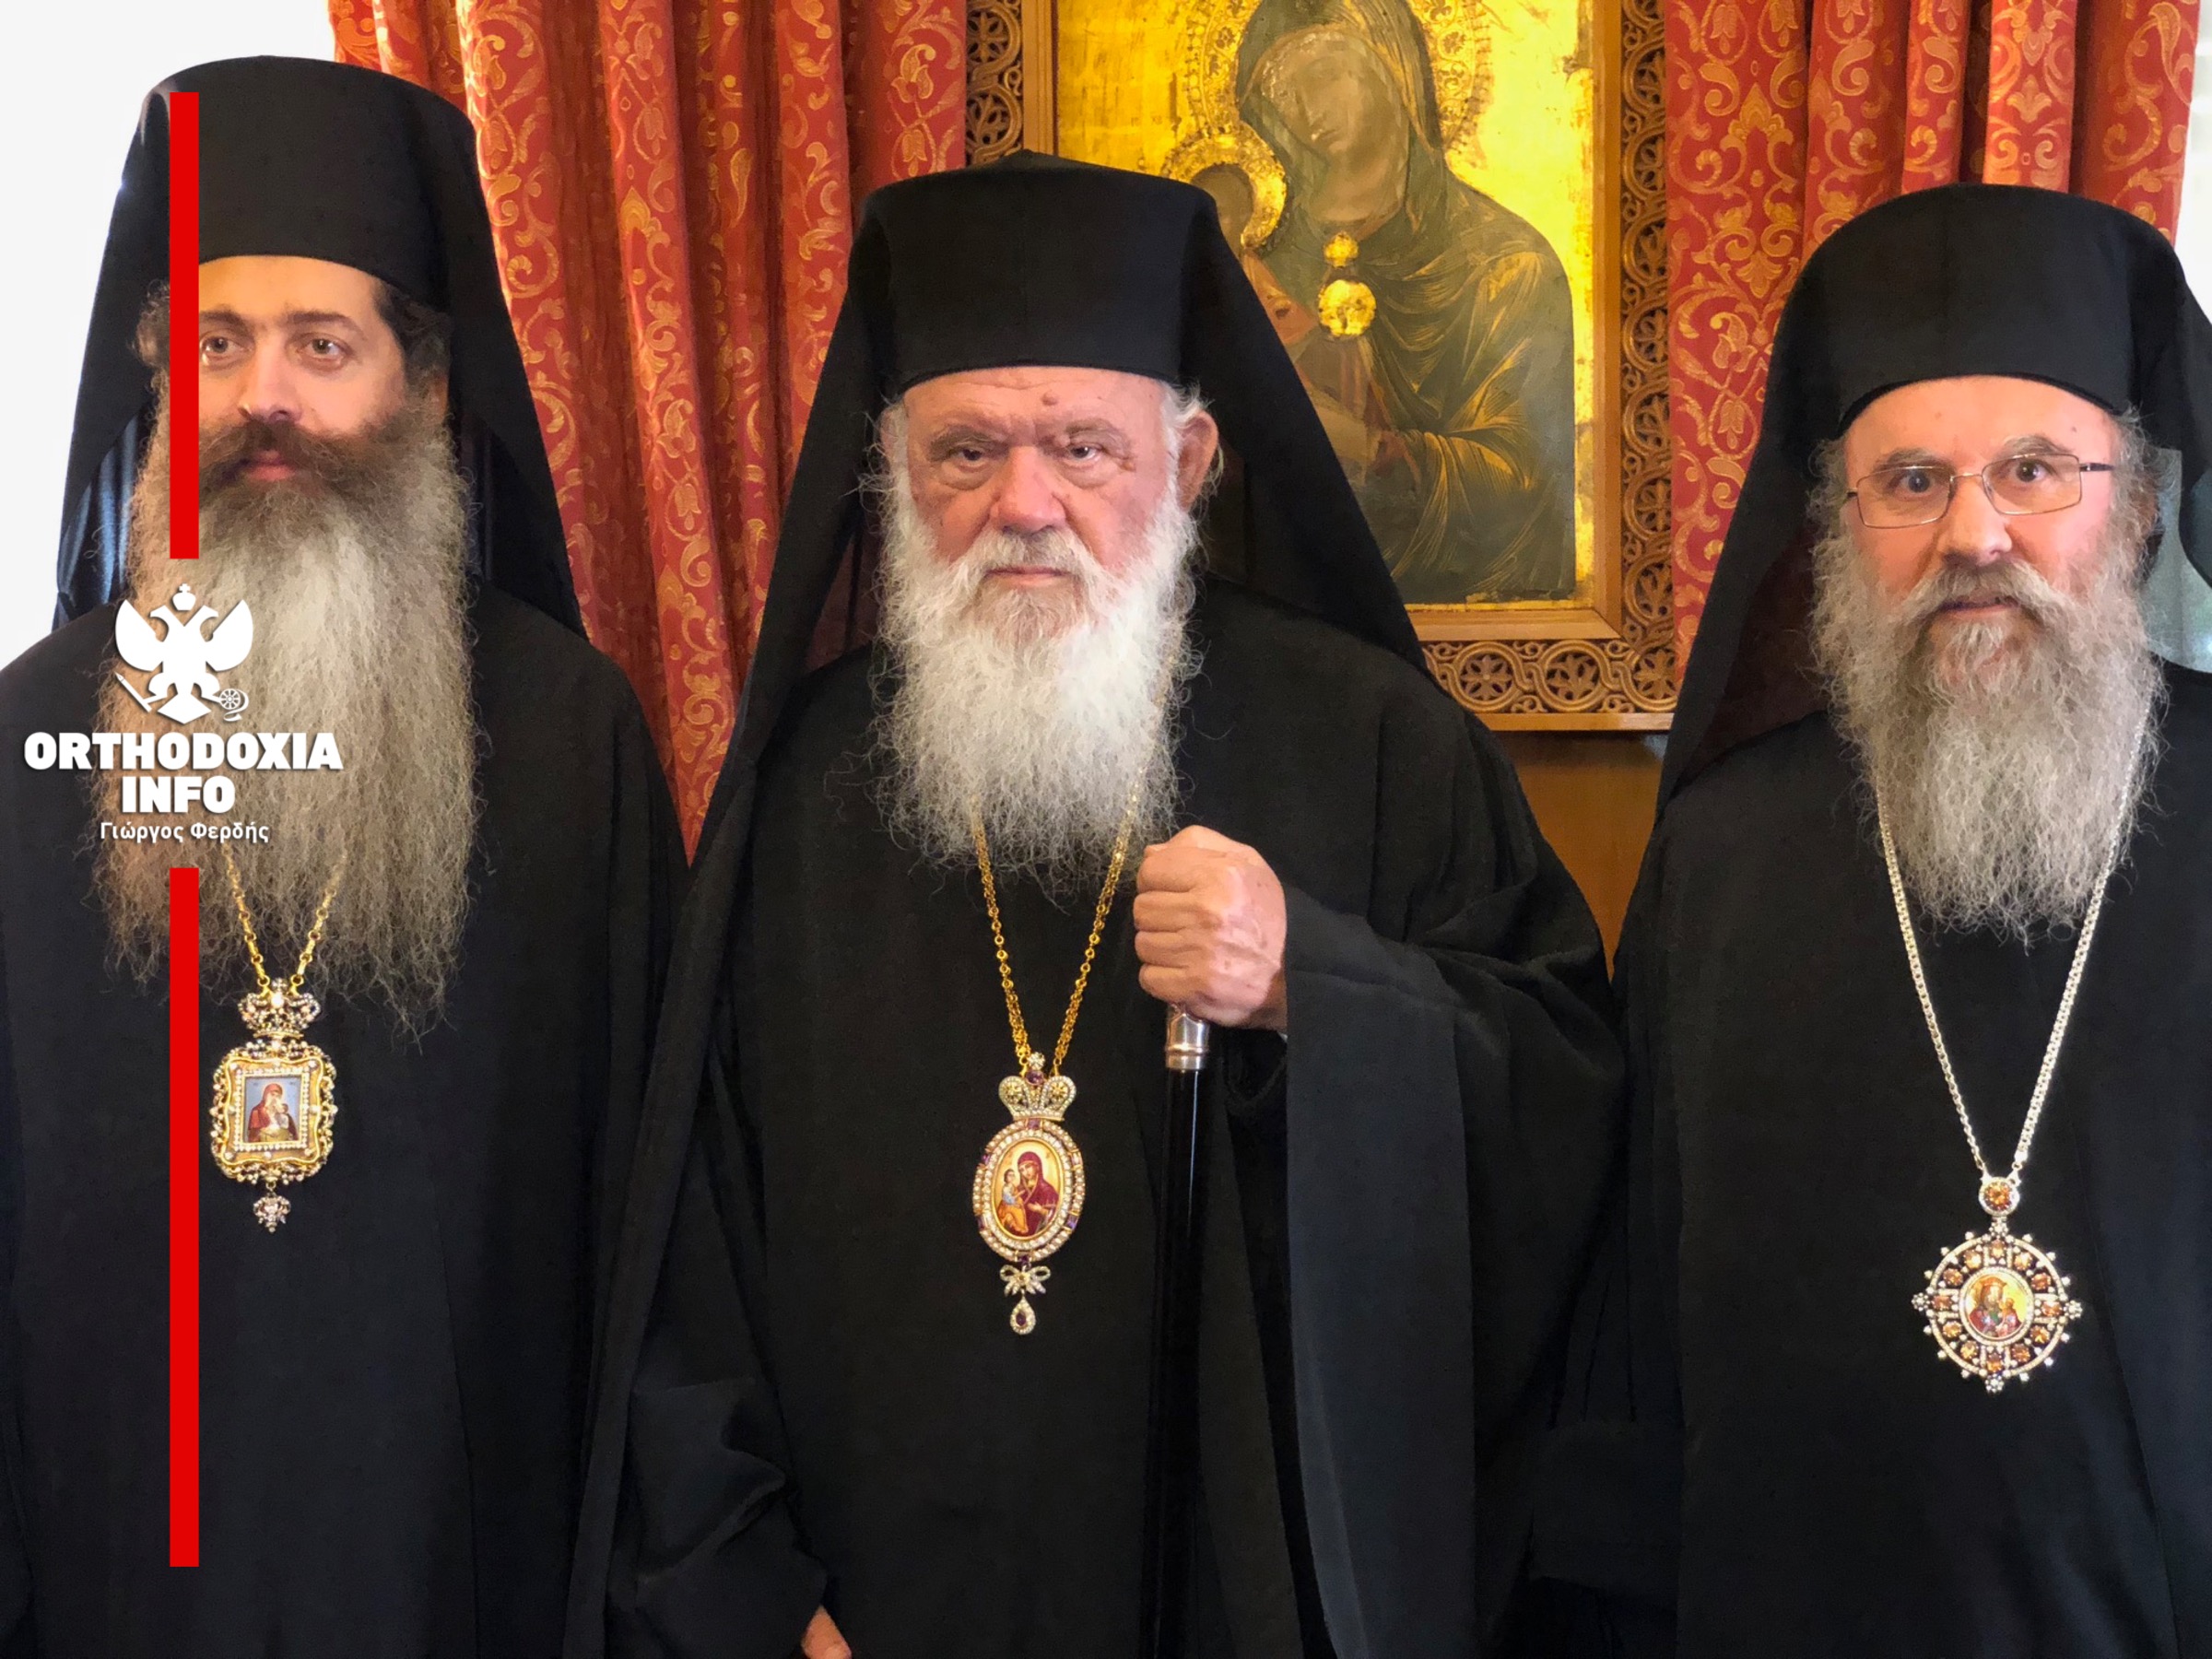 https://orthodoxia.info/news/wp-content/uploads/2018/03/dieveveoseis_voithon_5.jpg